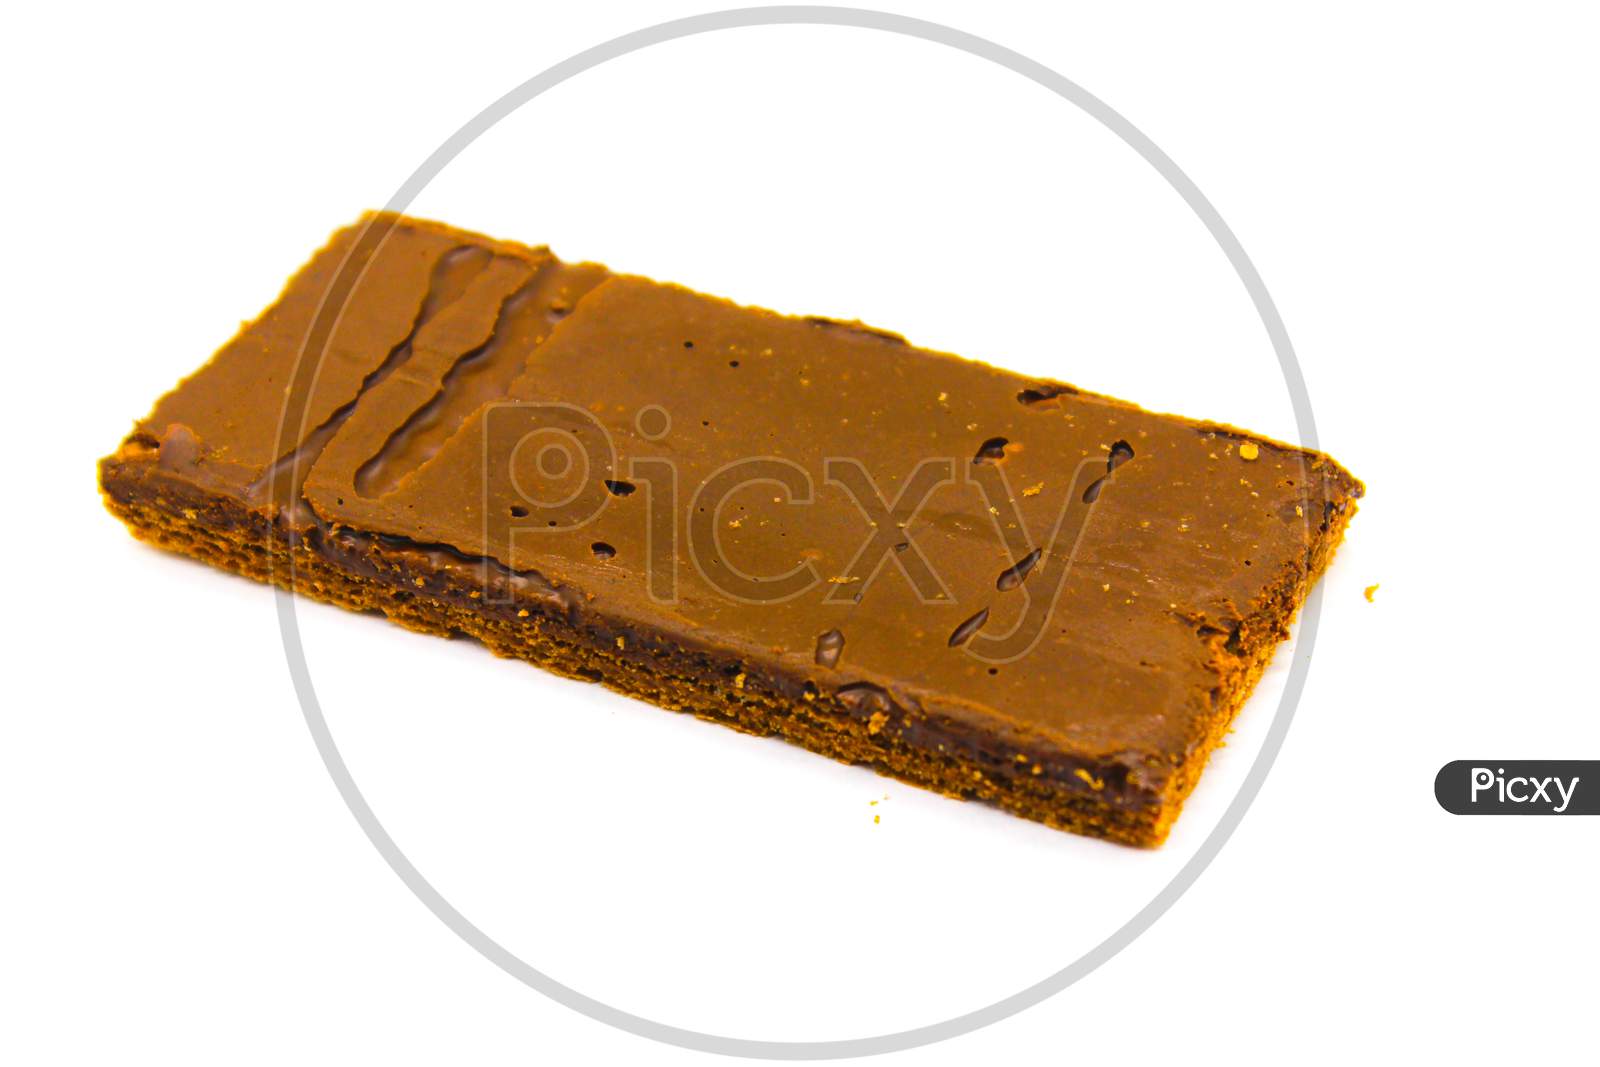 Chocolate Bar Isolated On White Background With Selective Focus